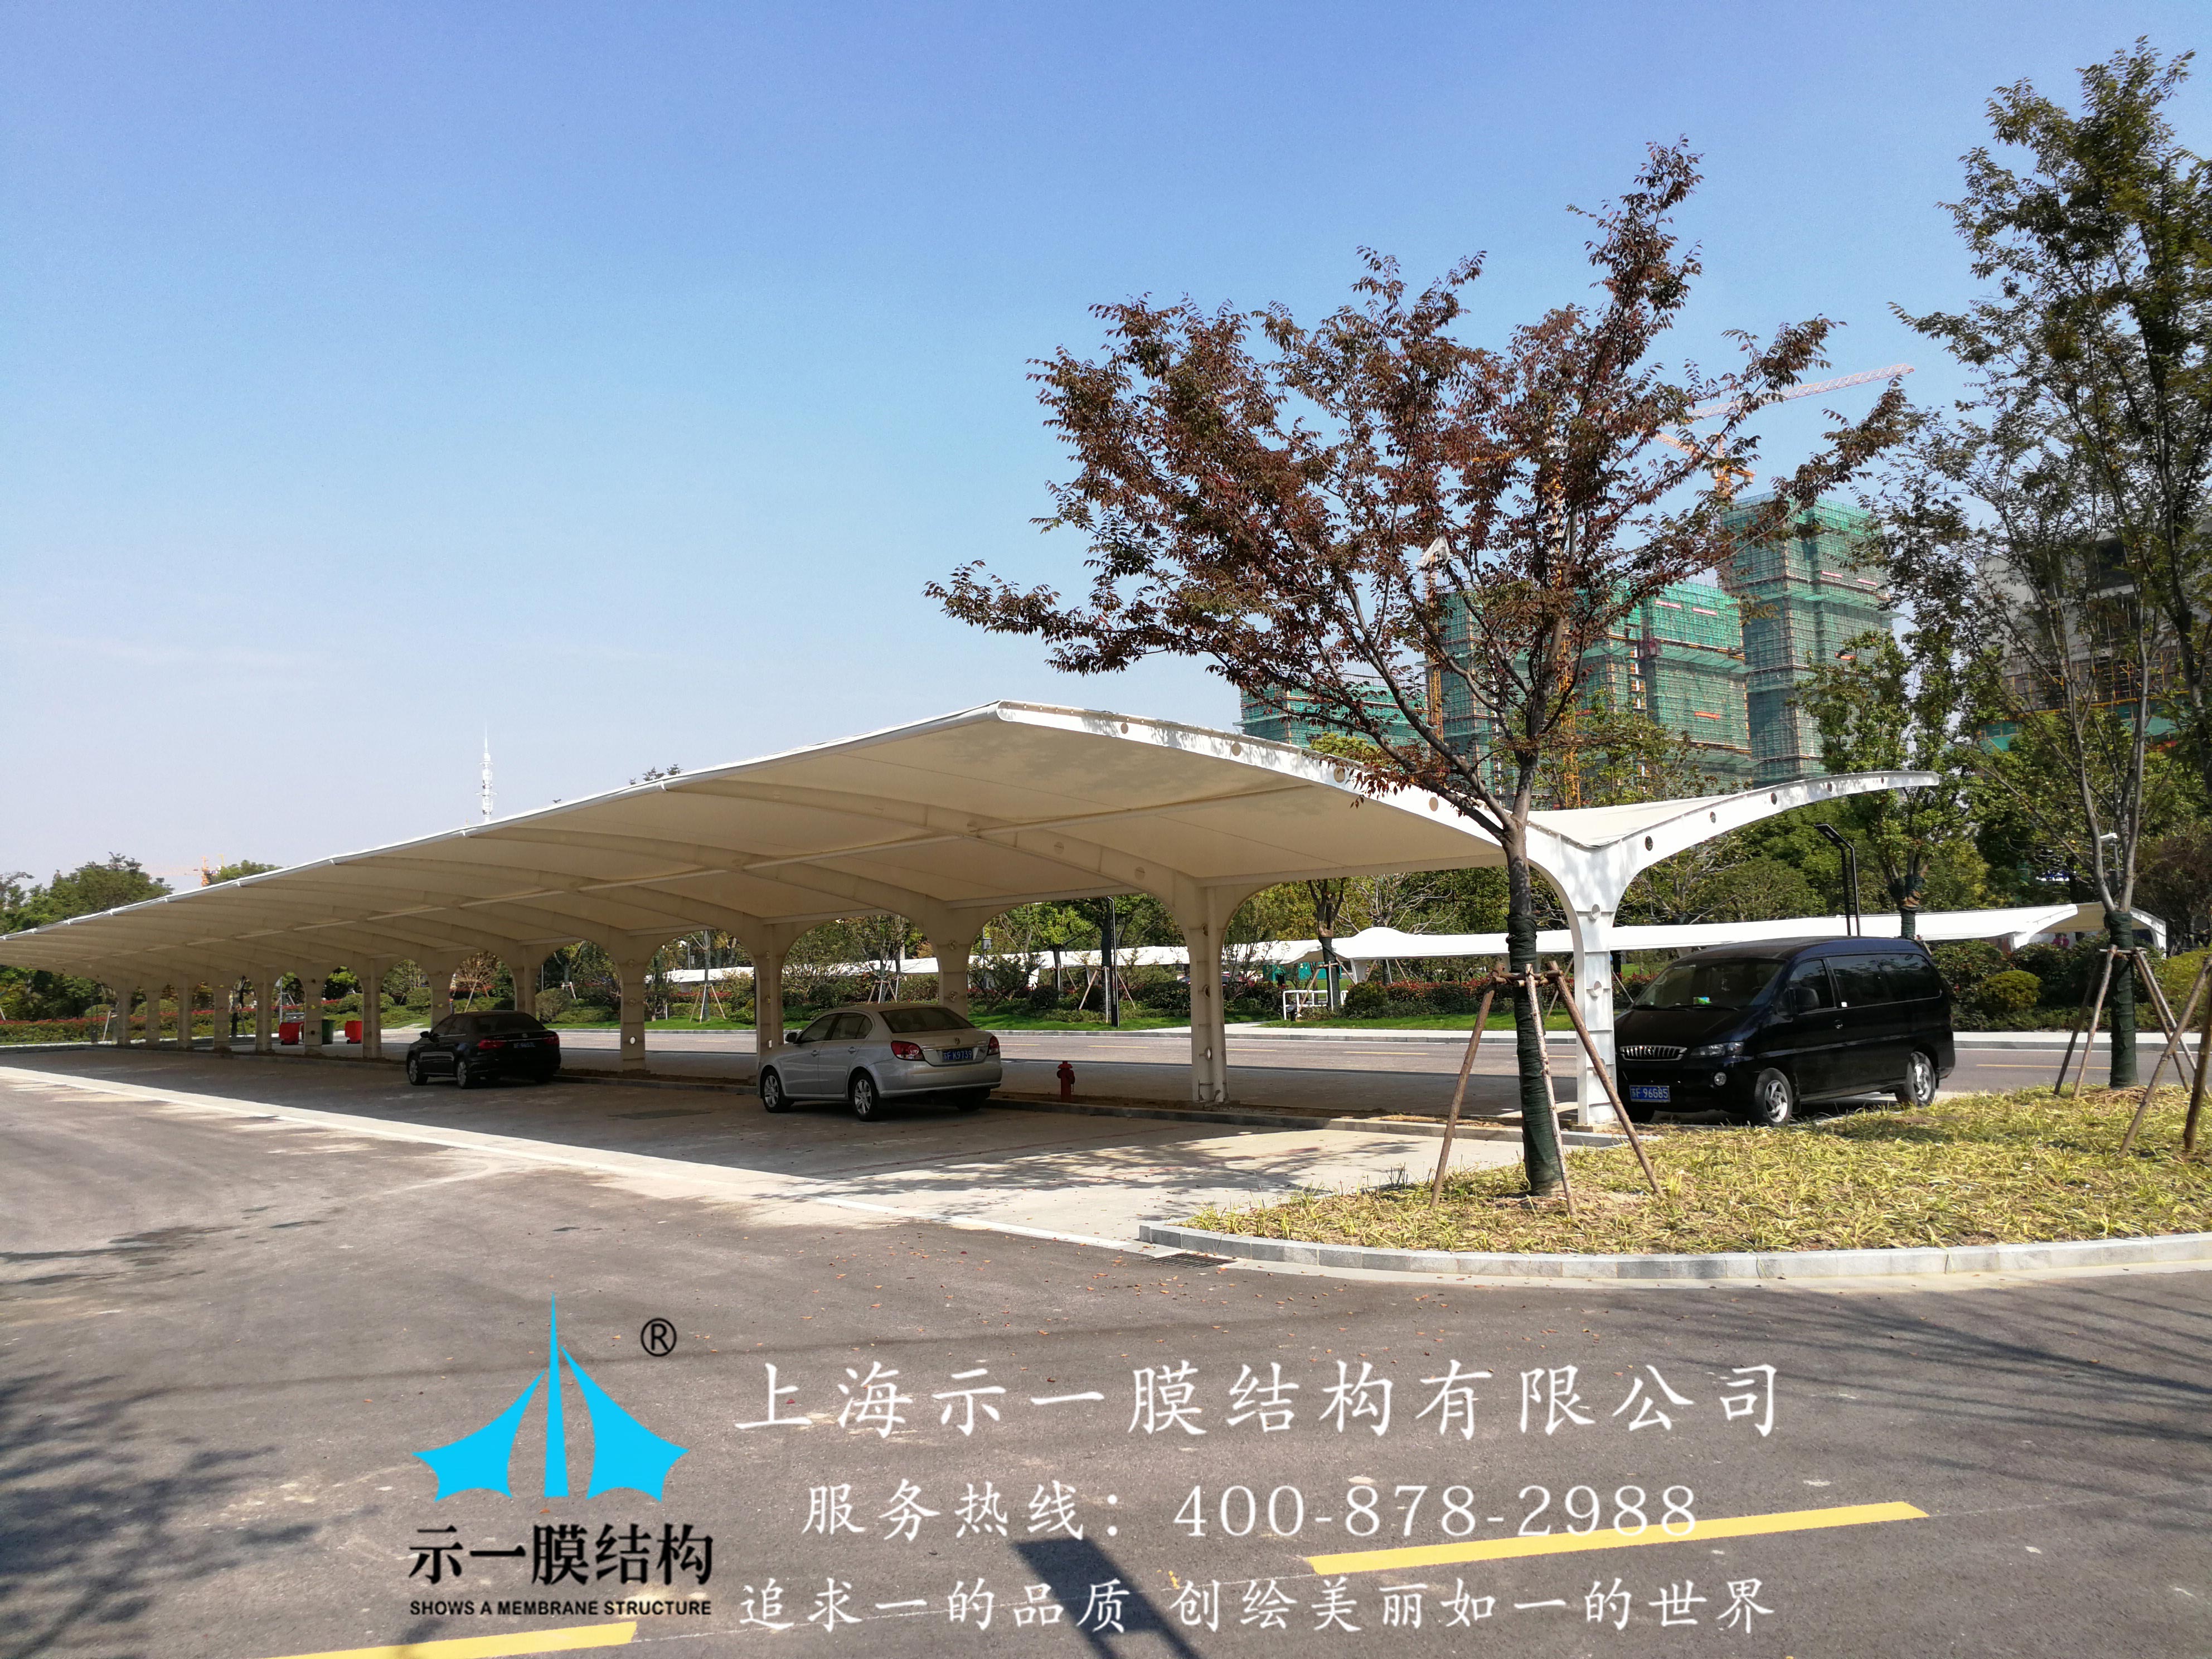 How much do you know about membrane structure carport maintenance methods?